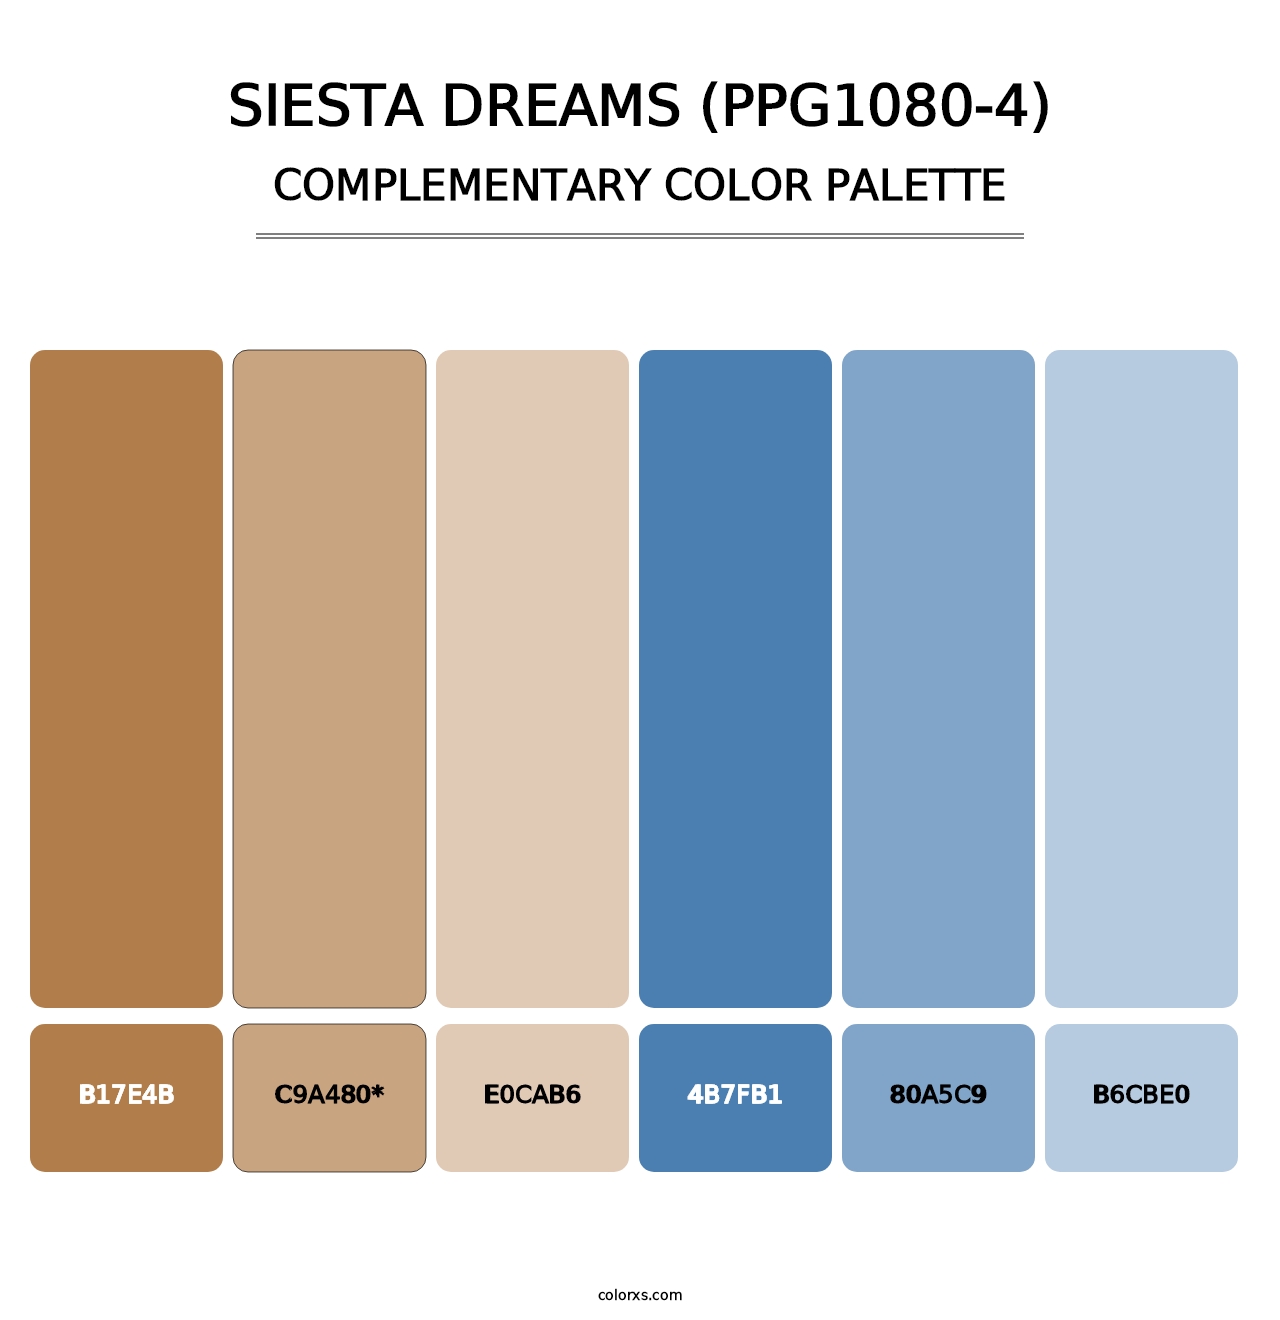 Siesta Dreams (PPG1080-4) - Complementary Color Palette